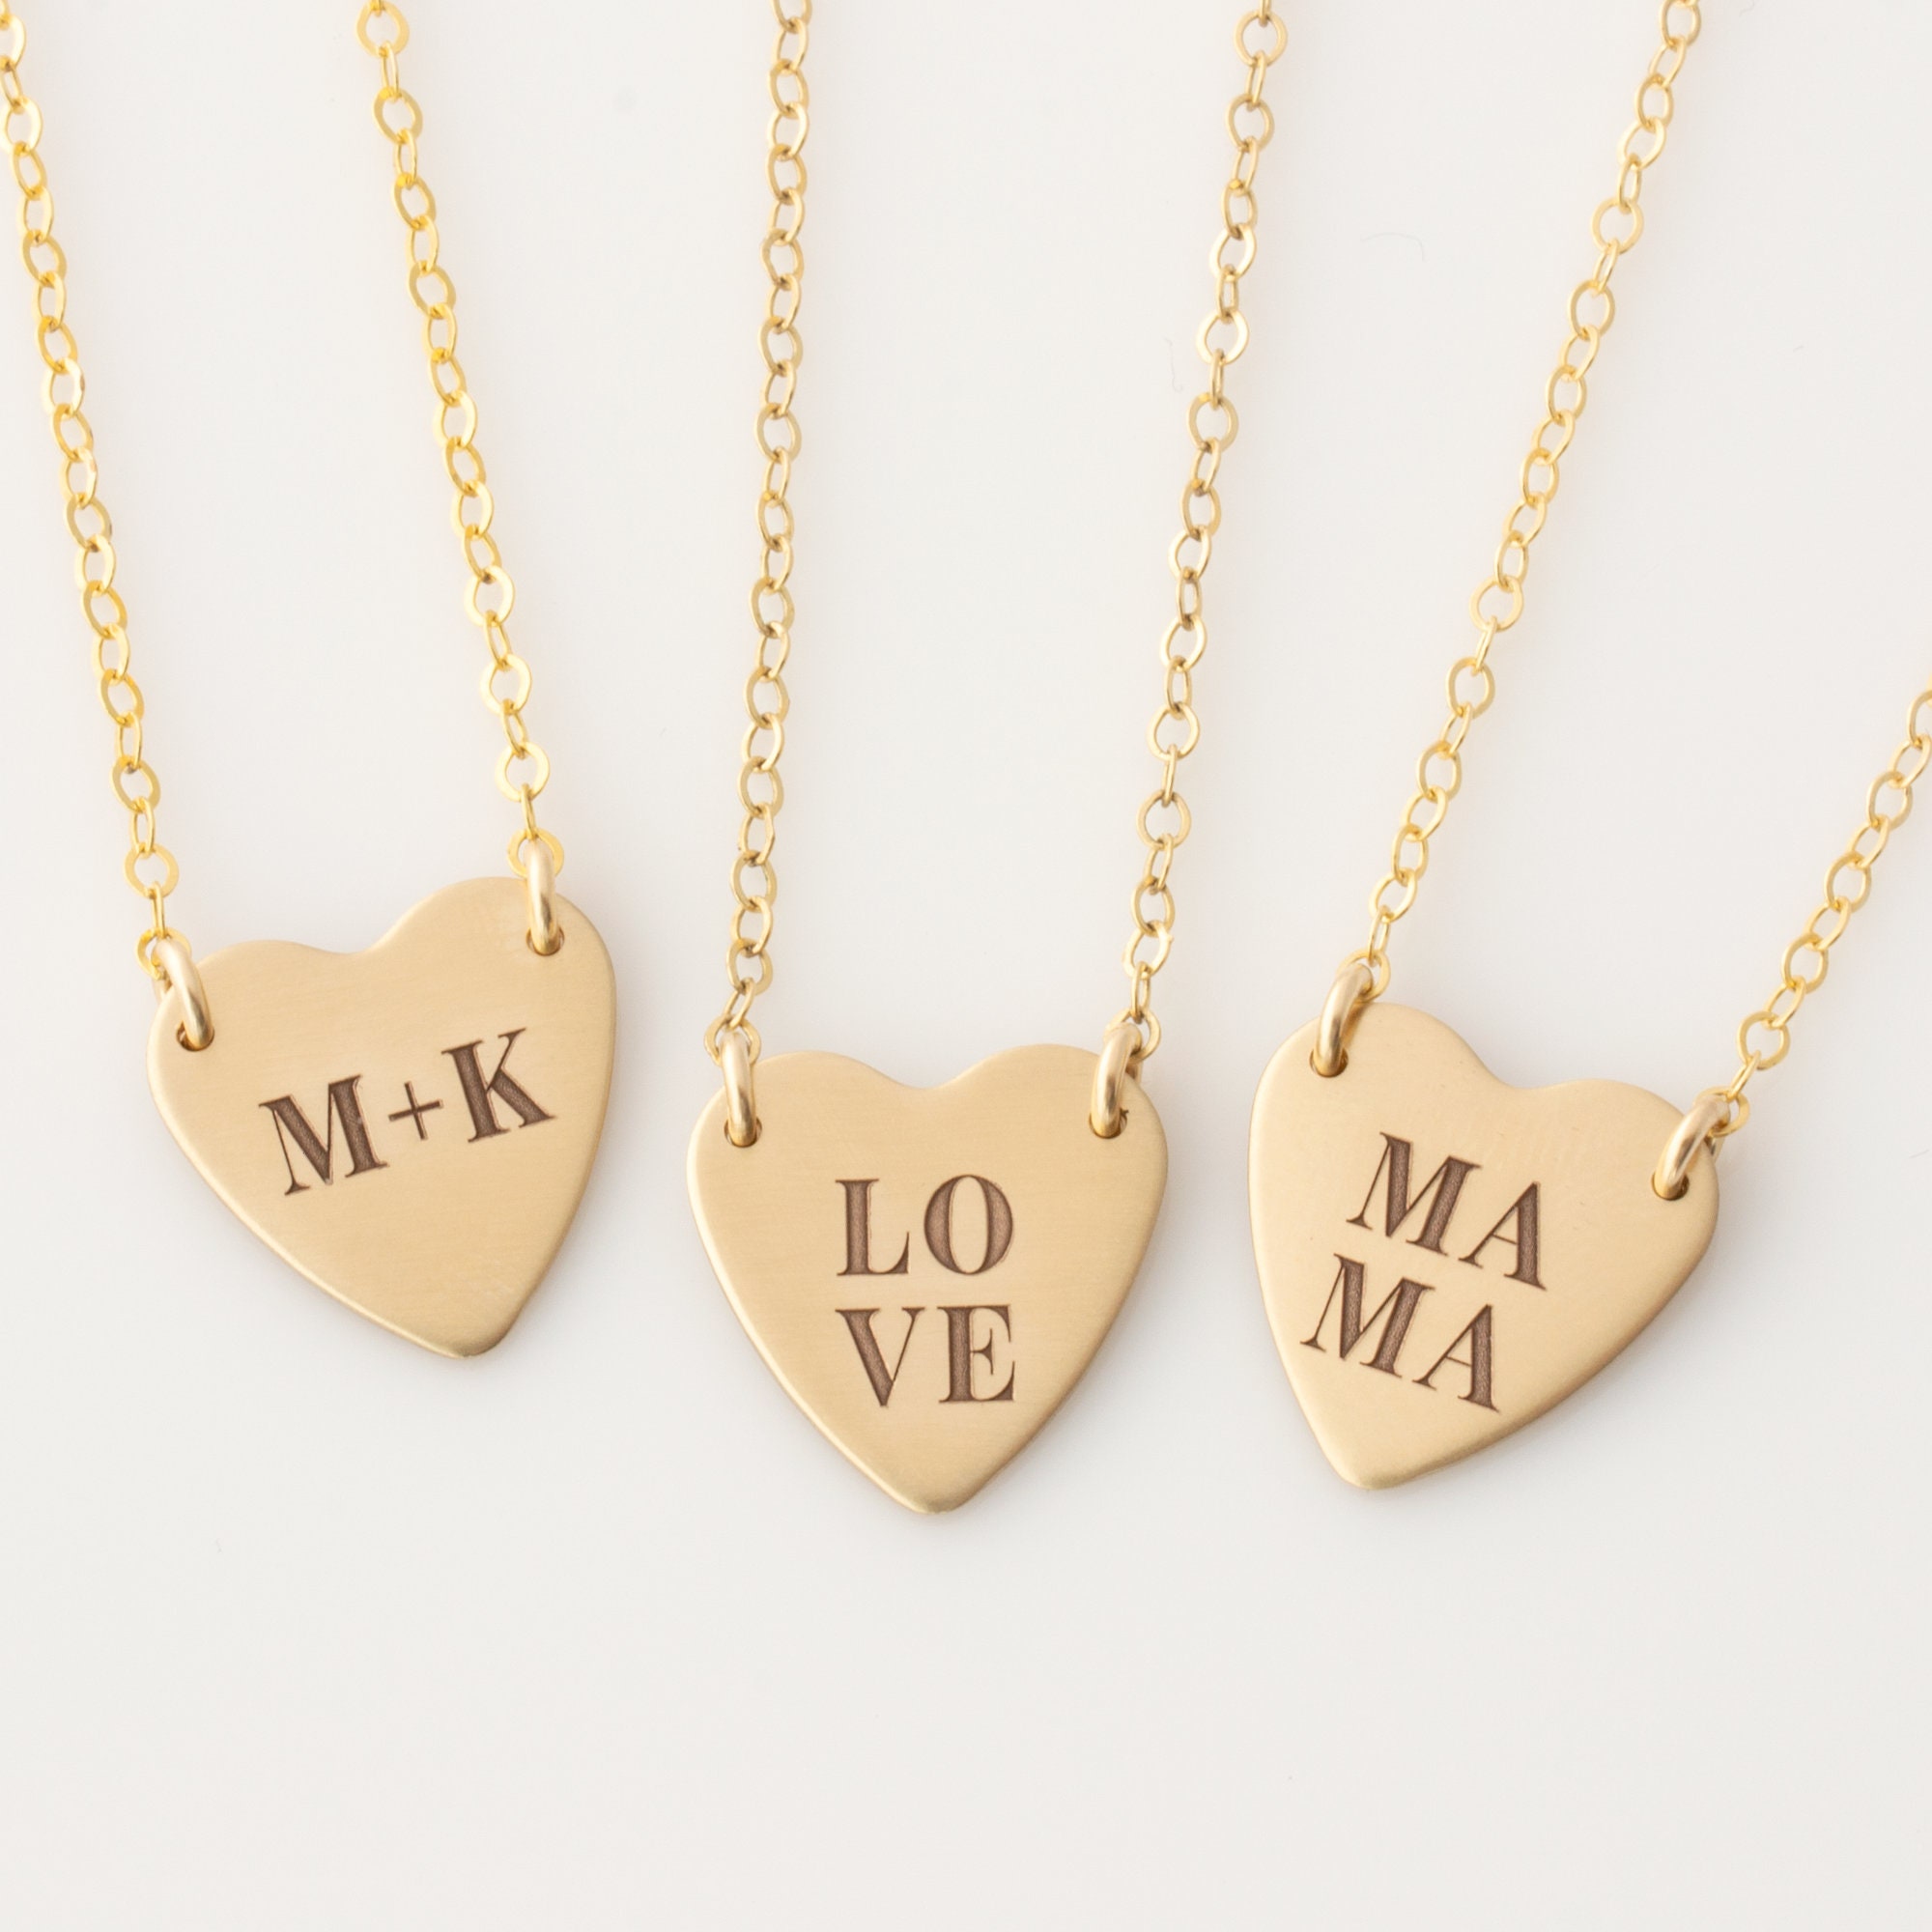 Gold Heart Necklace,Reversable Gold Heart,Gold Heart,Mothers Necklace,Girlfriend Necklace,Wife Necklace,Sisters